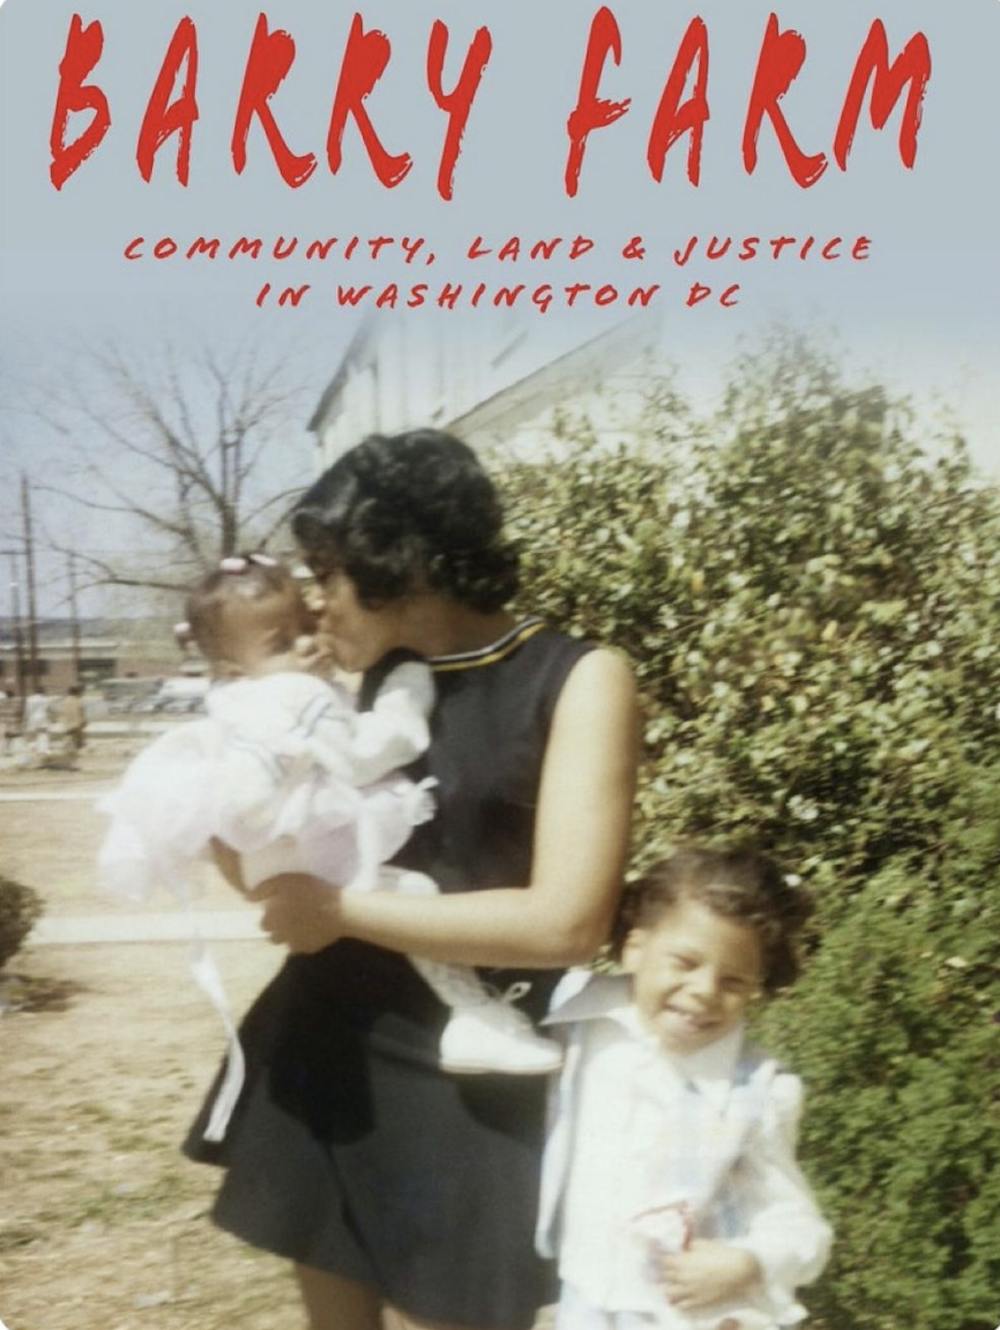 'Barry Farm: Community, Land & Justice in Washington, DC' captures the harrowing tale of community, land and justice in Washington, D.C.